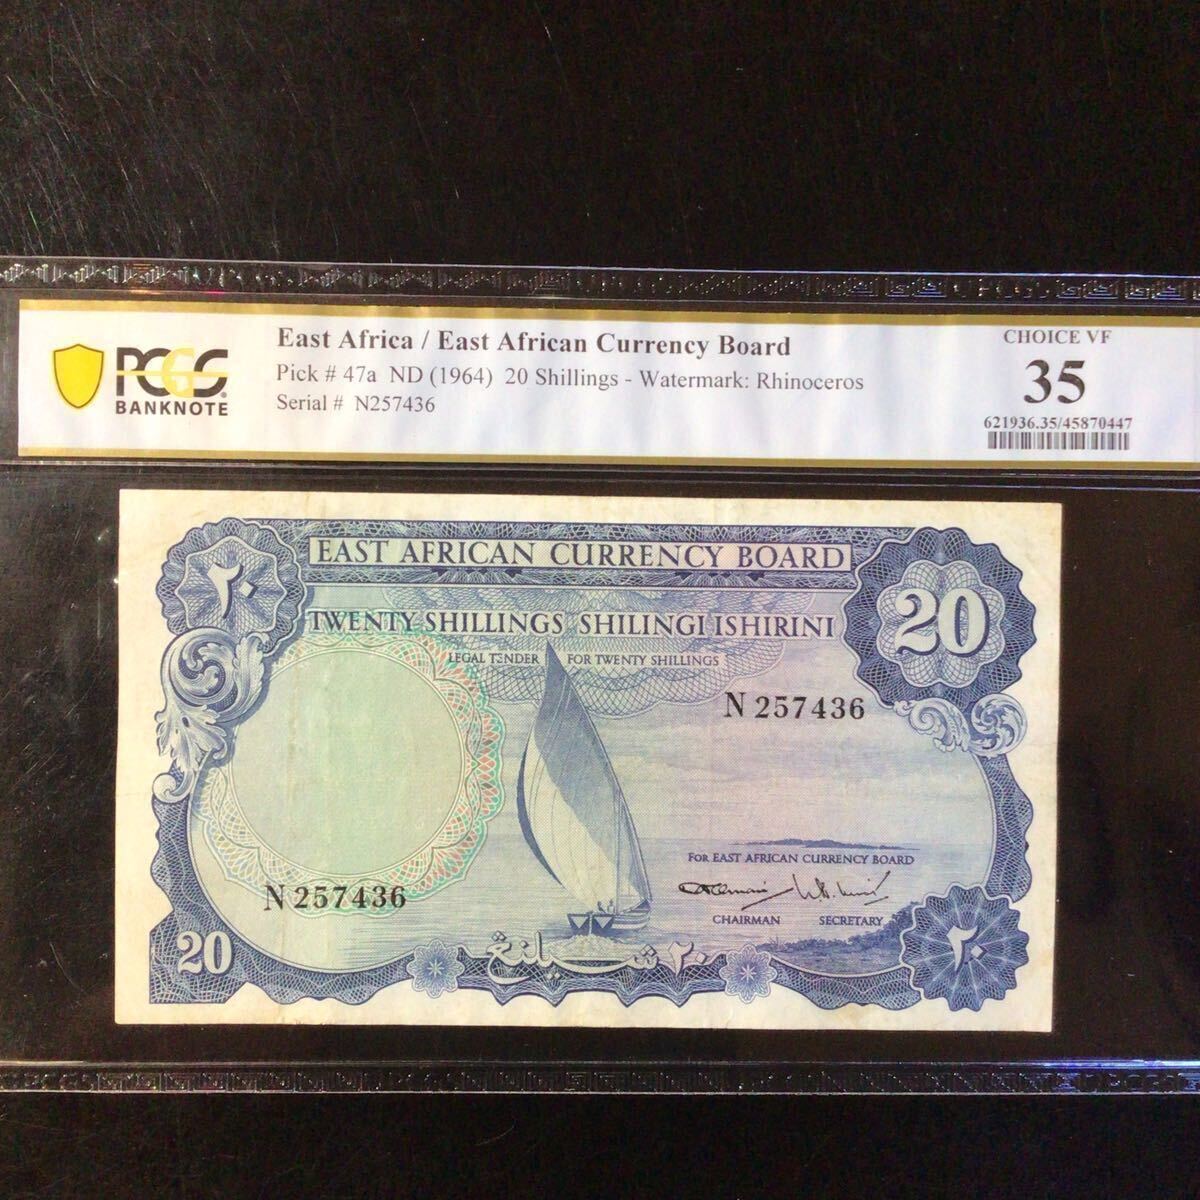 World Banknote Grading EAST AFRICA《East Afican Currency Board》20 Shillings【1964】『PCGS Grading Choice Very Fine 35』_画像1